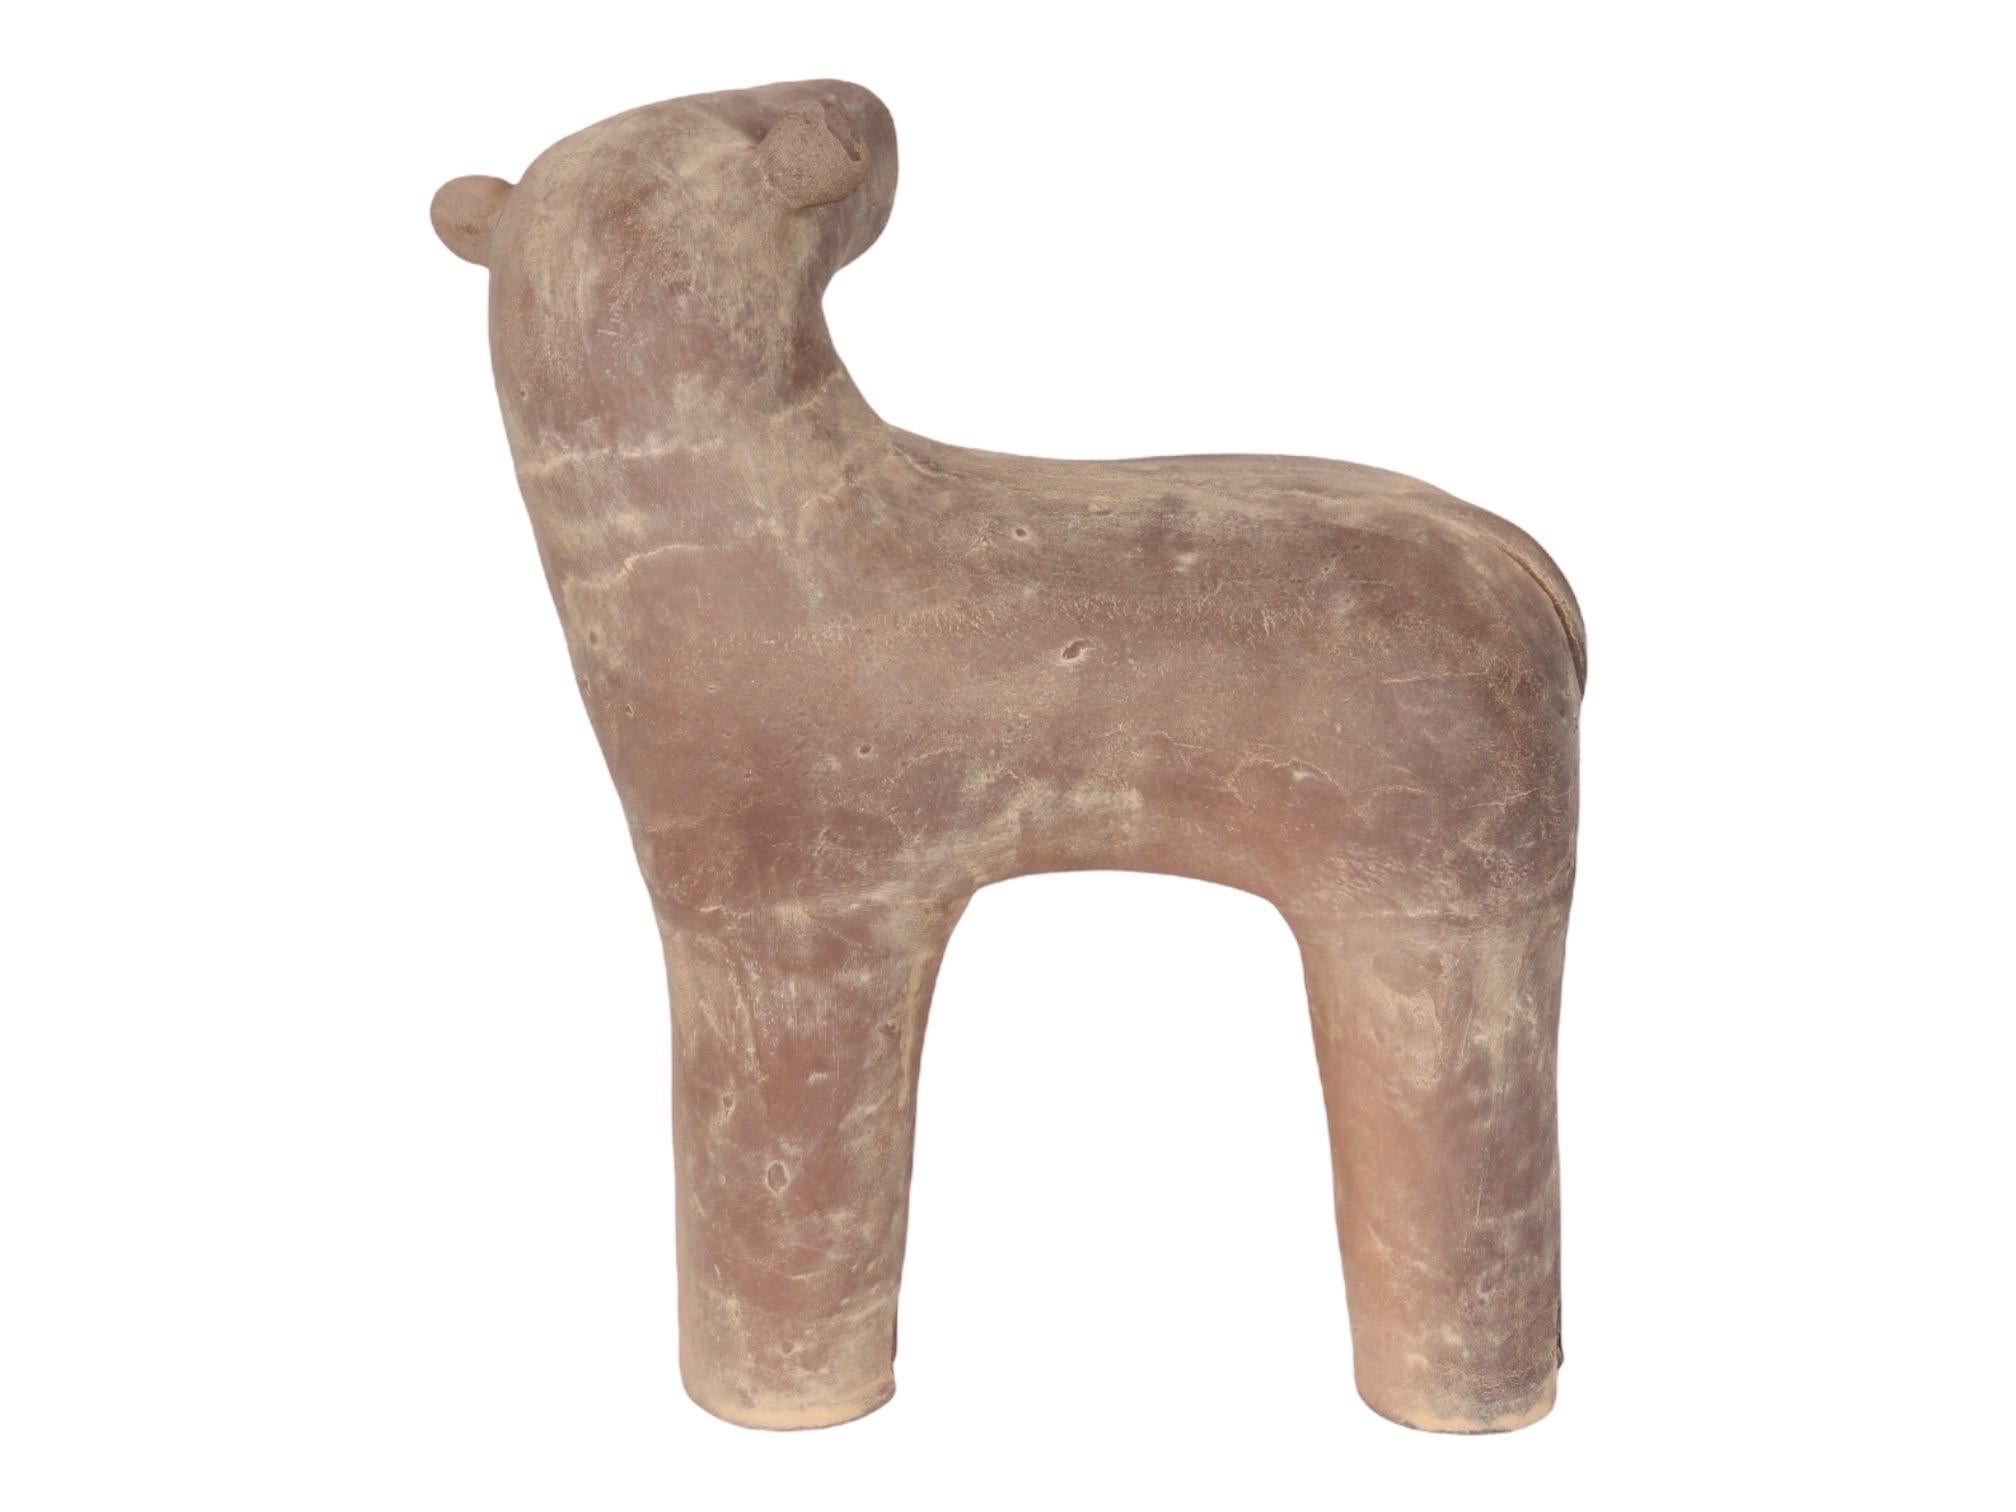 A primitive sheep sculpture made of clay. Simply shaped with marks for the eyes, nostrils and mouth, as well as on the feet to indicate hooves. One ear has been reattached, the repair is secure, and visible in the pictures.